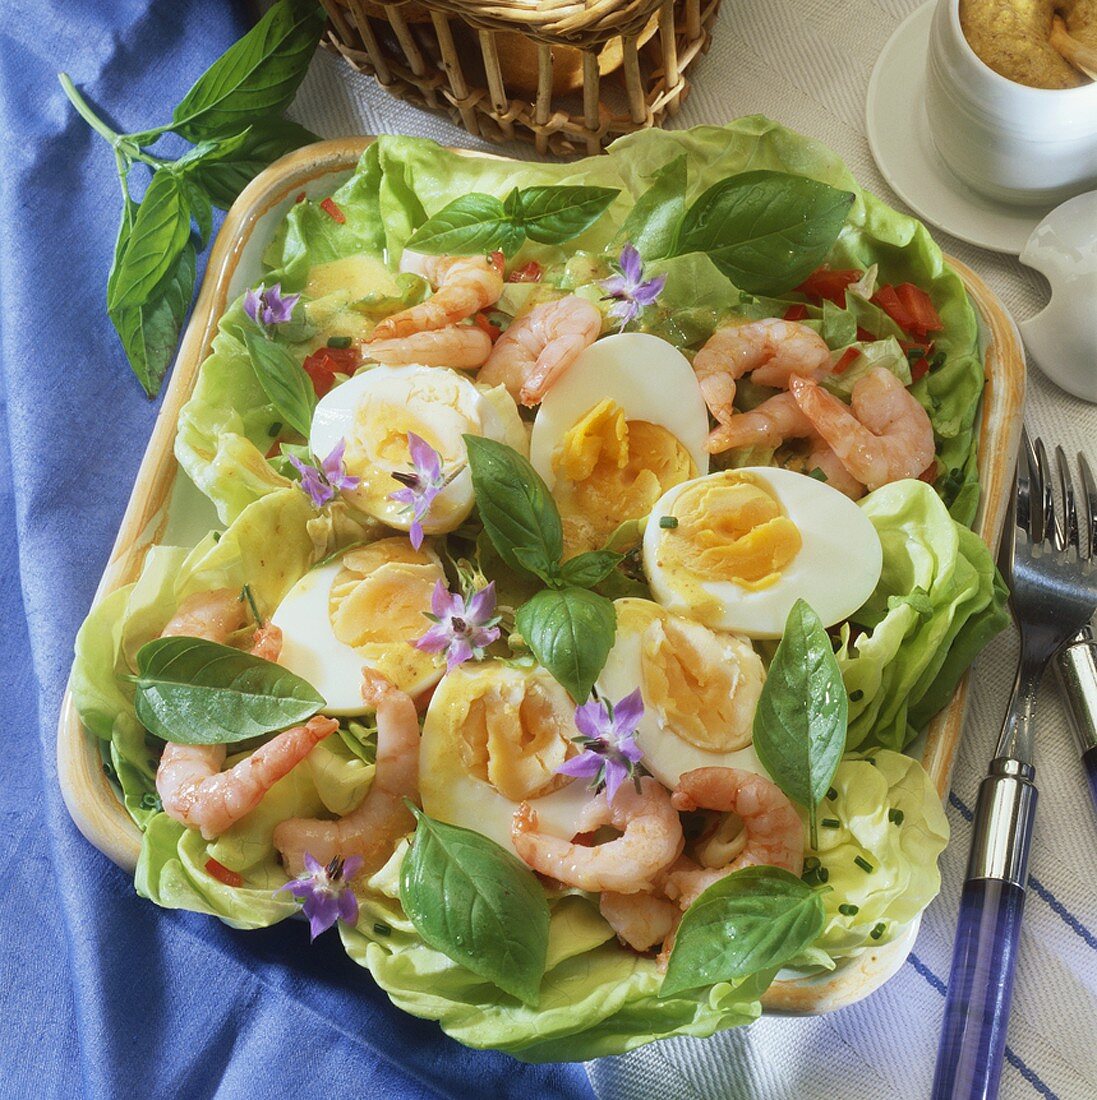 Hard-boiled eggs in mustard sauce with shrimps on lettuce